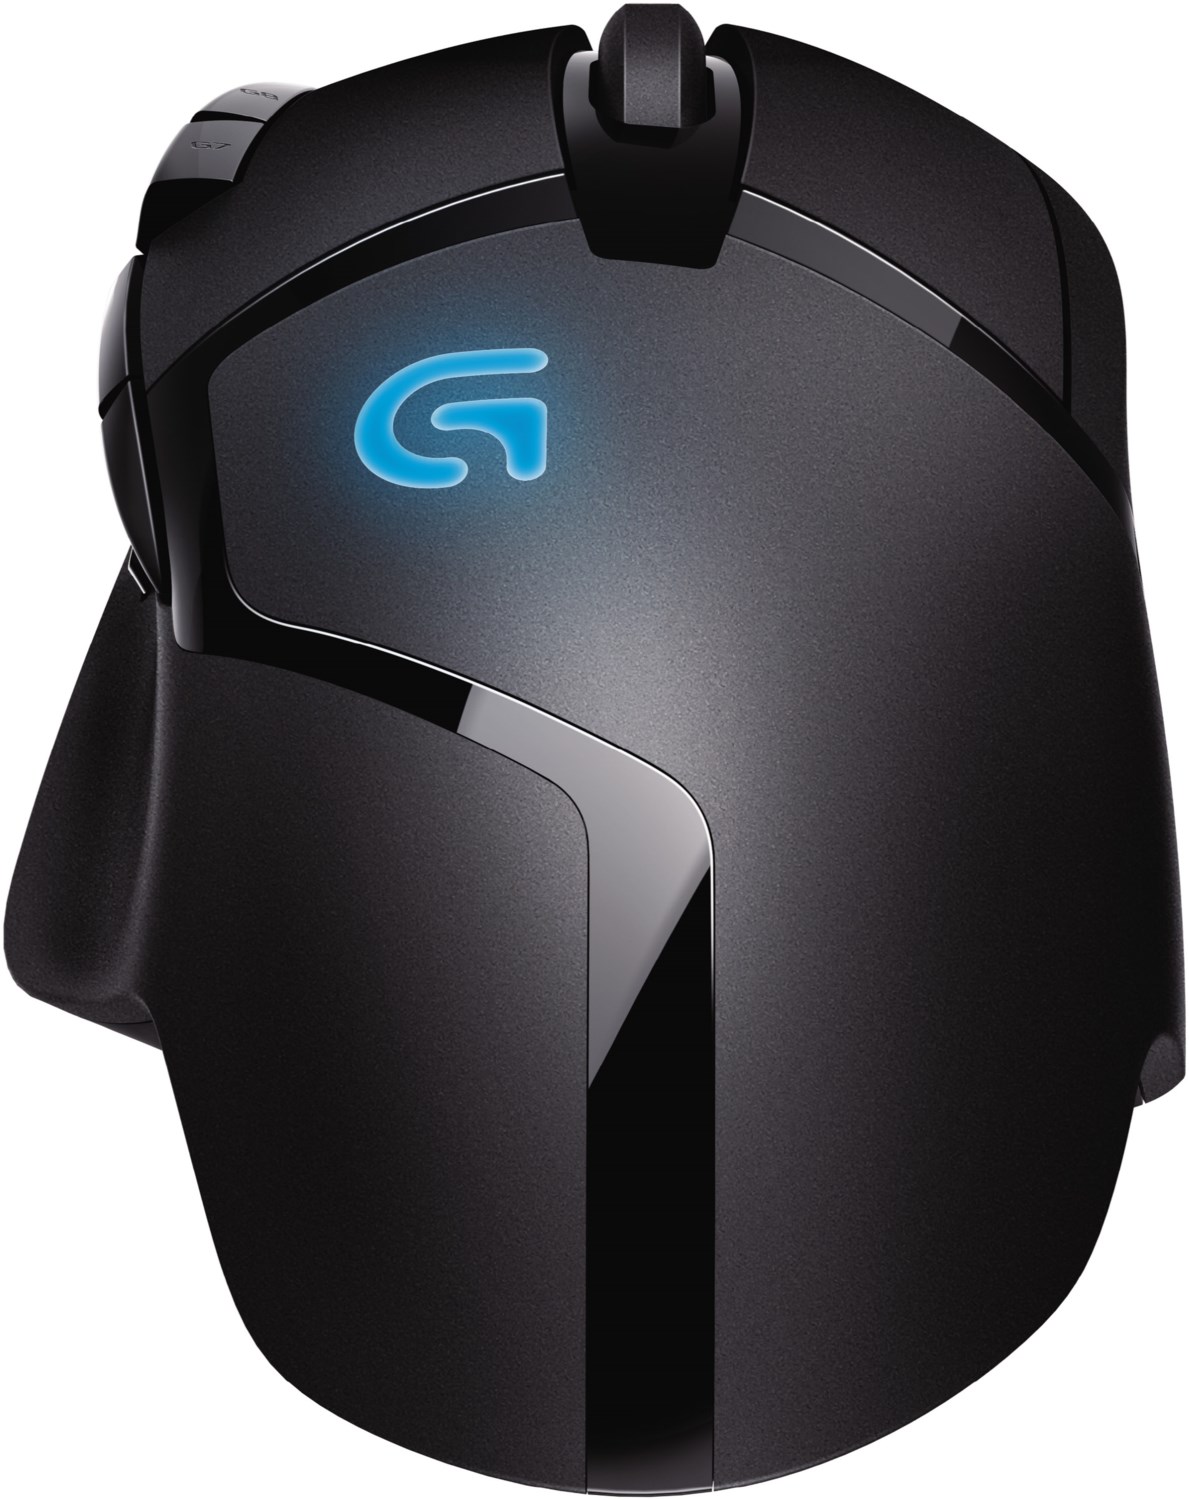 G402 Hyperion Fury FPS Gaming Maus